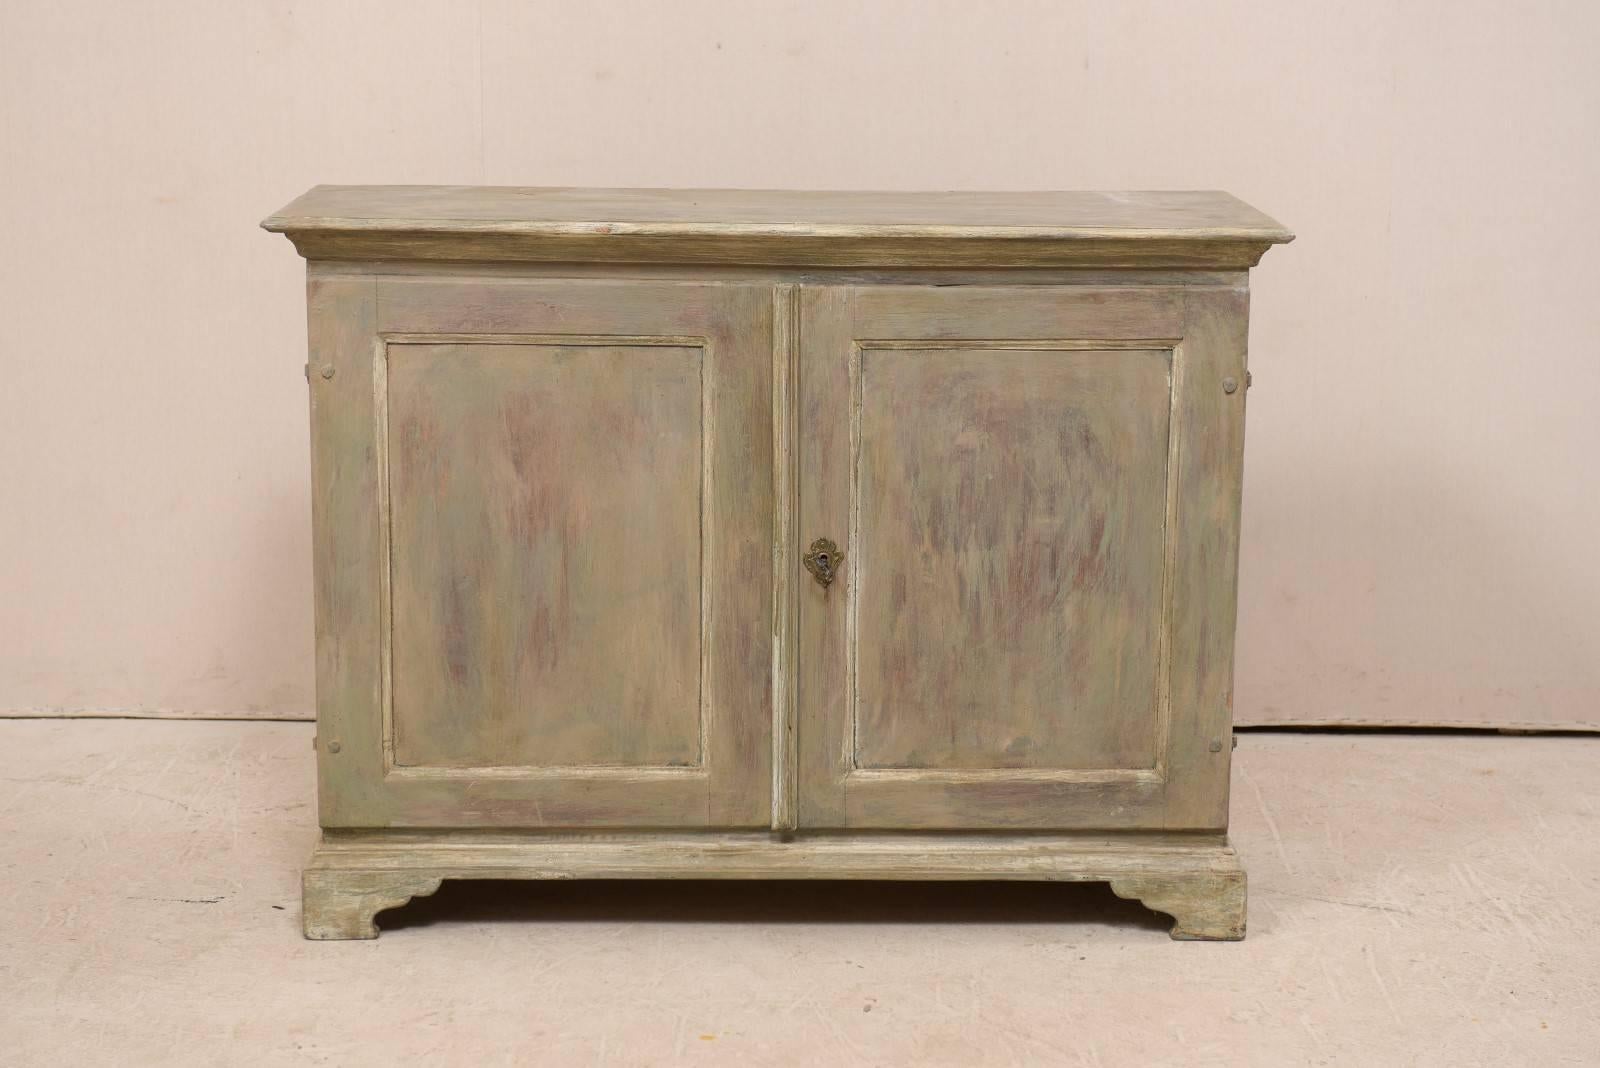 A 19th century Swedish painted wood storage cabinet. This antique Swedish two-door buffet cabinet buffet features a slightly overhanging top, over a base with two recessed panel doors, and raised on bracket feet. The two doors open to reveal three